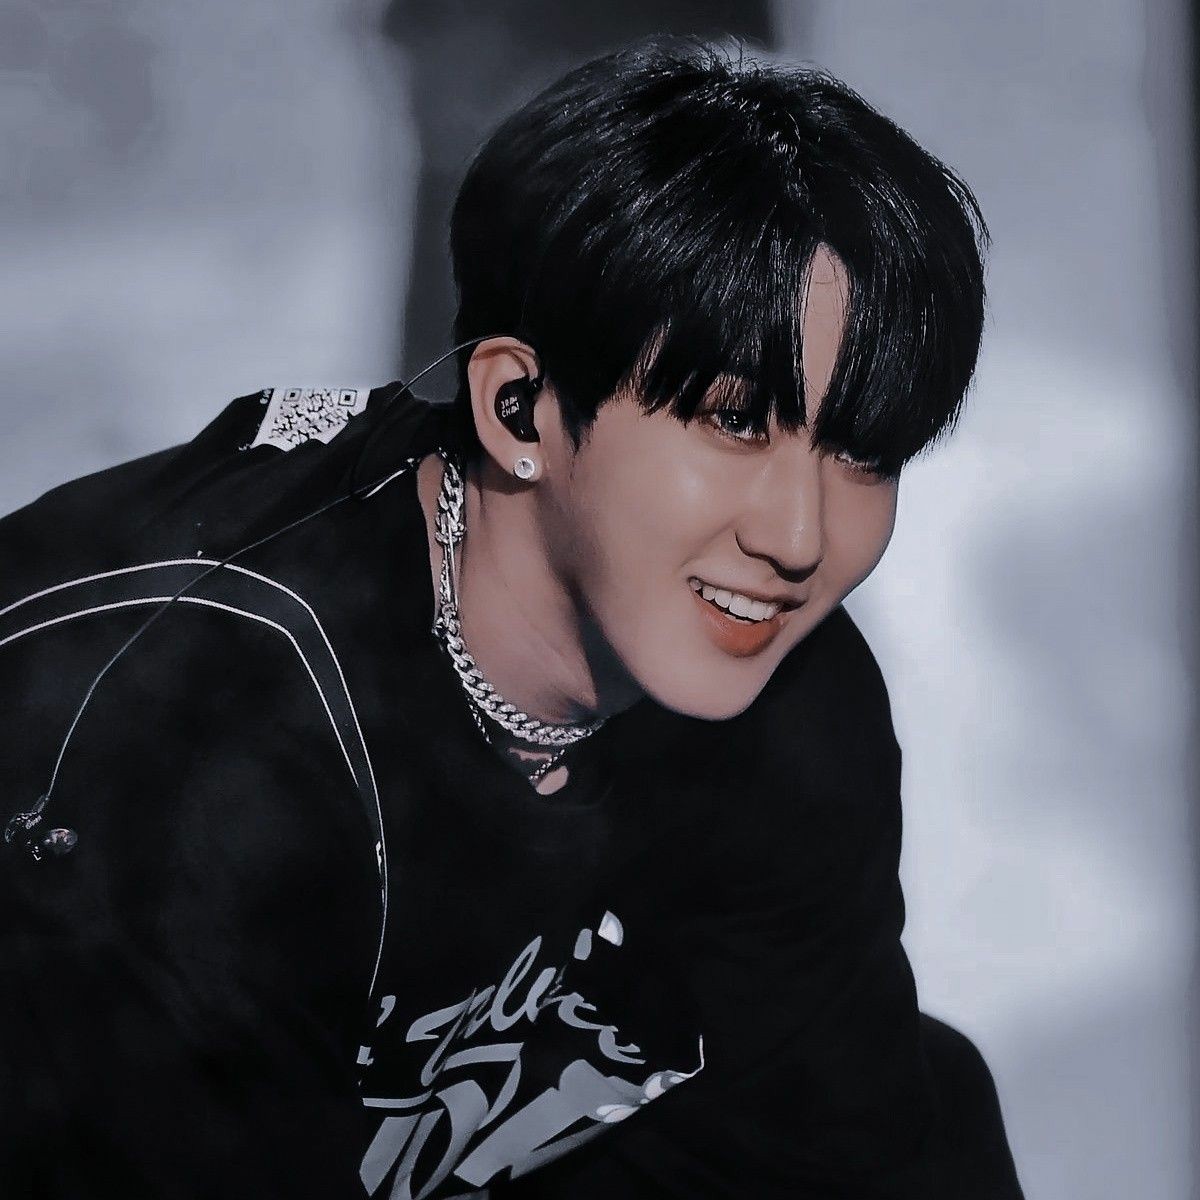 This, and many more, are the reasons why  #Changbin is such an important person, both to Stray Kids and to STAY. He's like a pilar. He's strong. He's warm. He's transparent. He's talented beyond measure. And I'm truly thankful for him being who he is. Proudly, unapologetically him